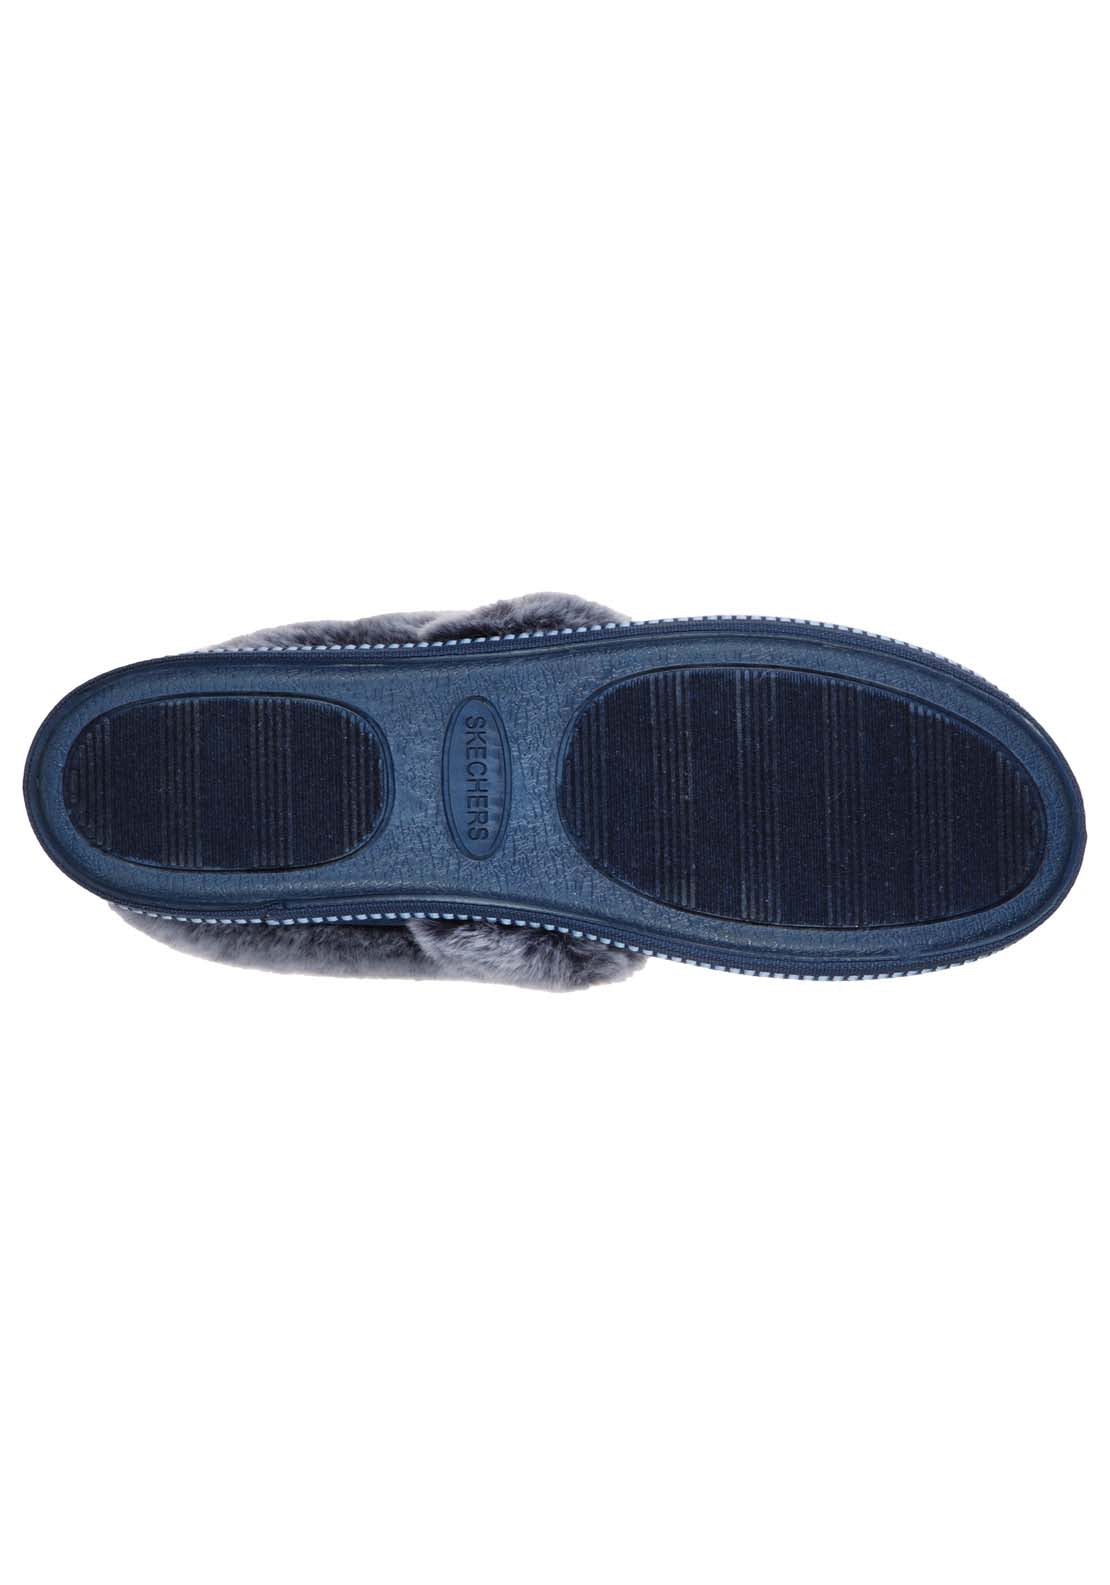 Skechers Cosy Campfire Slipper - Navy 4 Shaws Department Stores